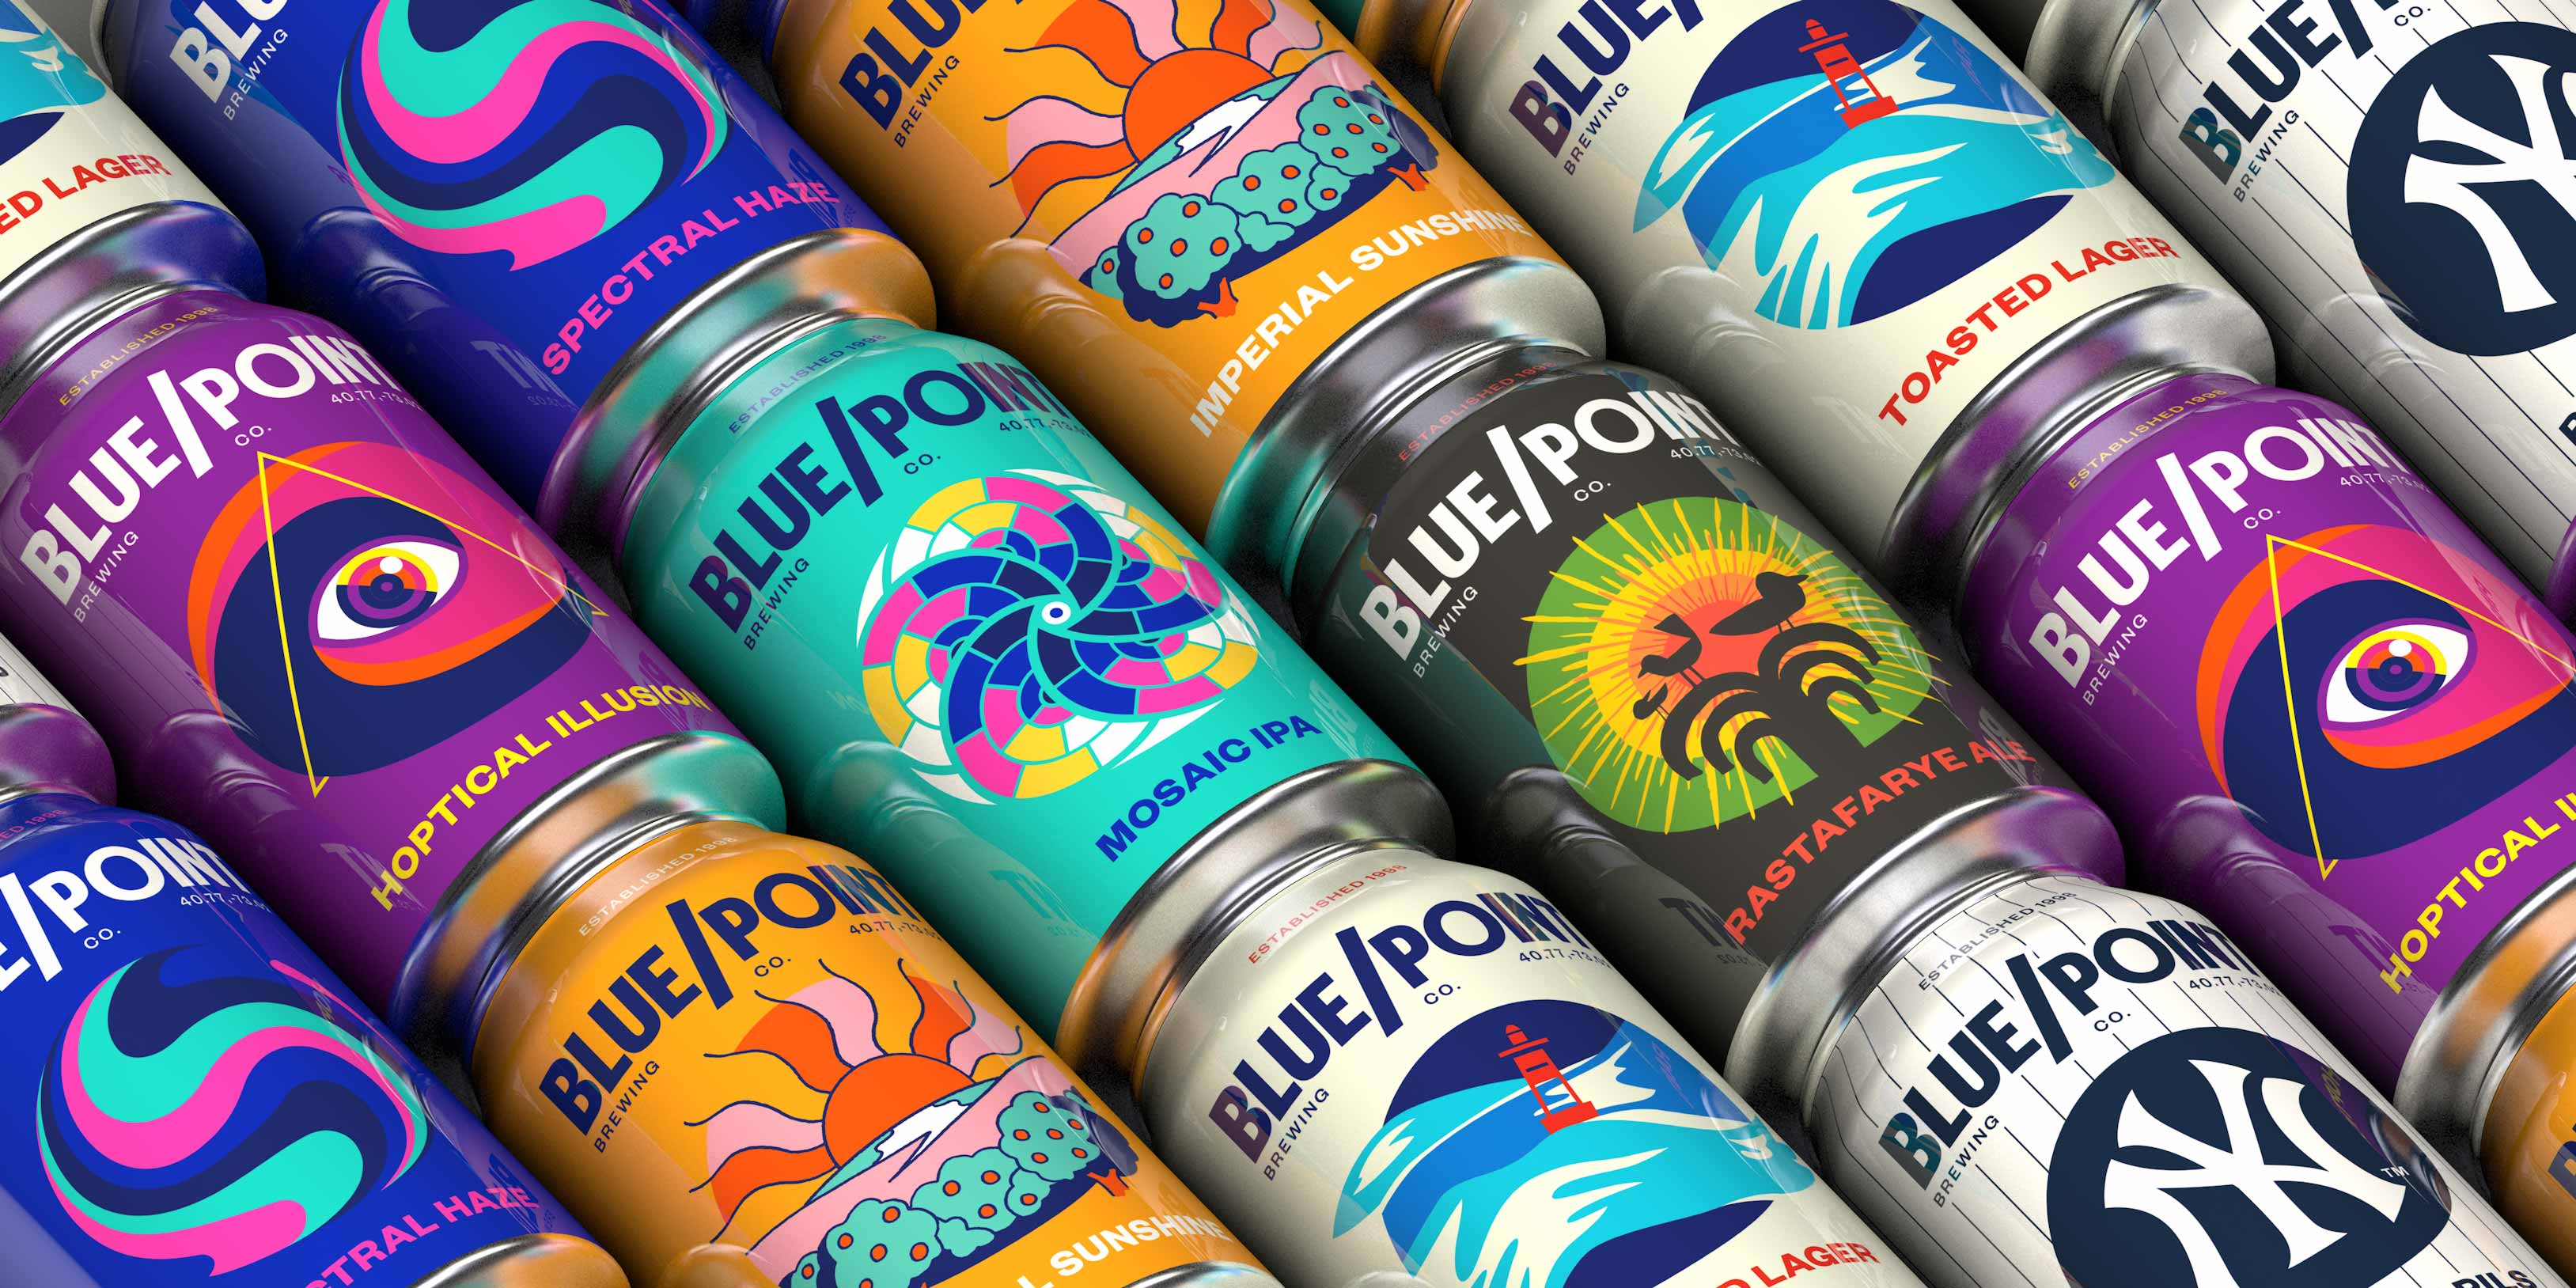 New VBI for Blue Point Brewing Co. by Bardo Industries